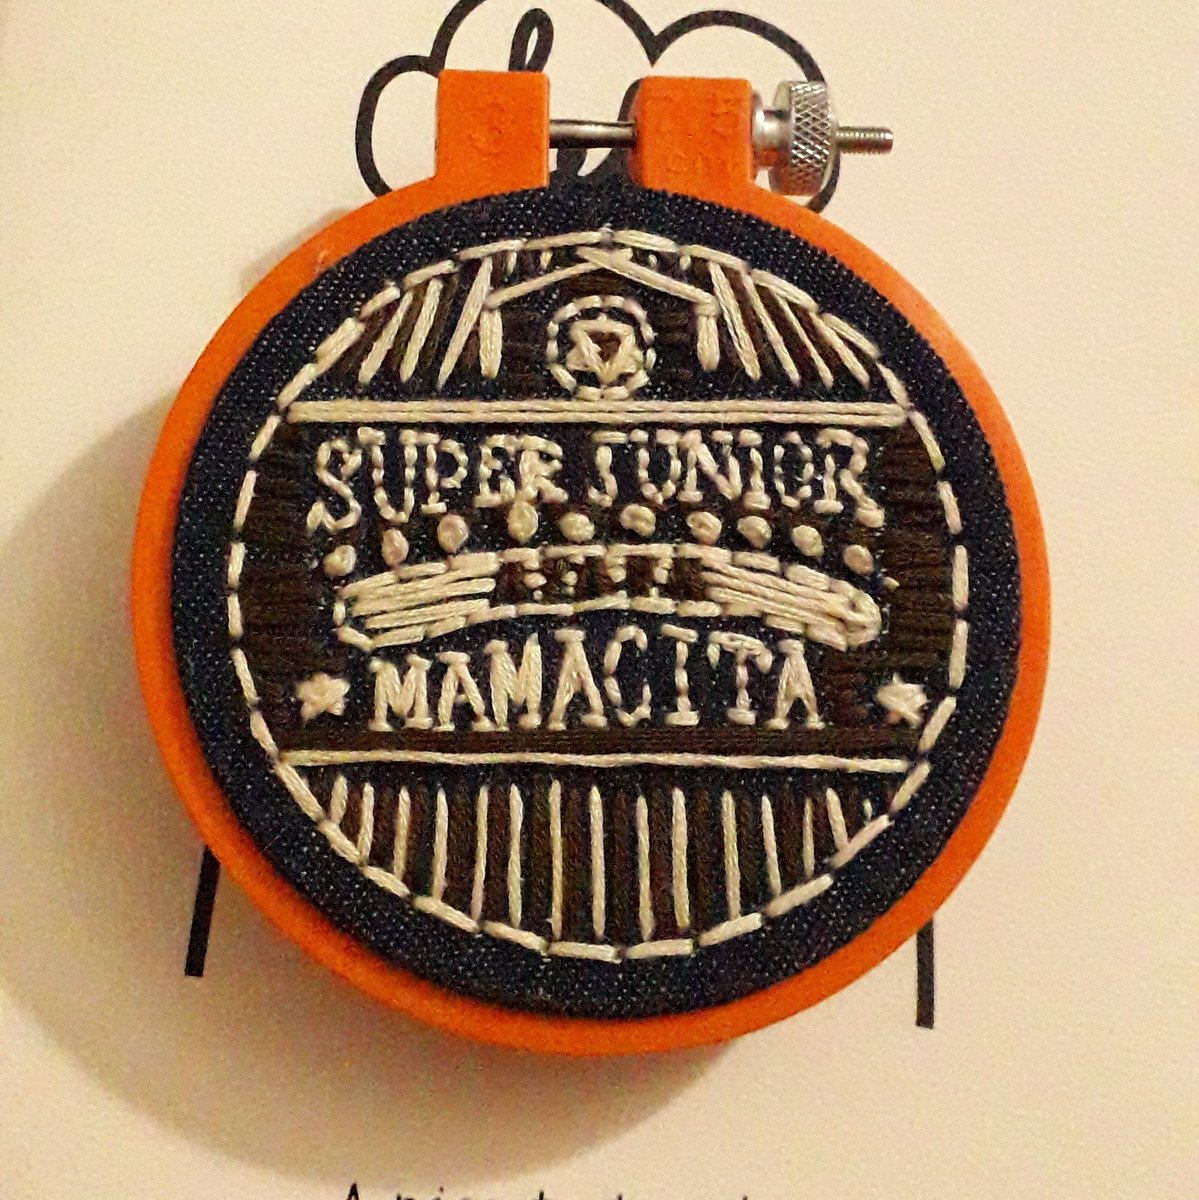 mamacita.(yes i have too much free time) the colors aren't the same but  this might be my favorite so far  embroidering "mamacita" was so awkward tho skdkskds